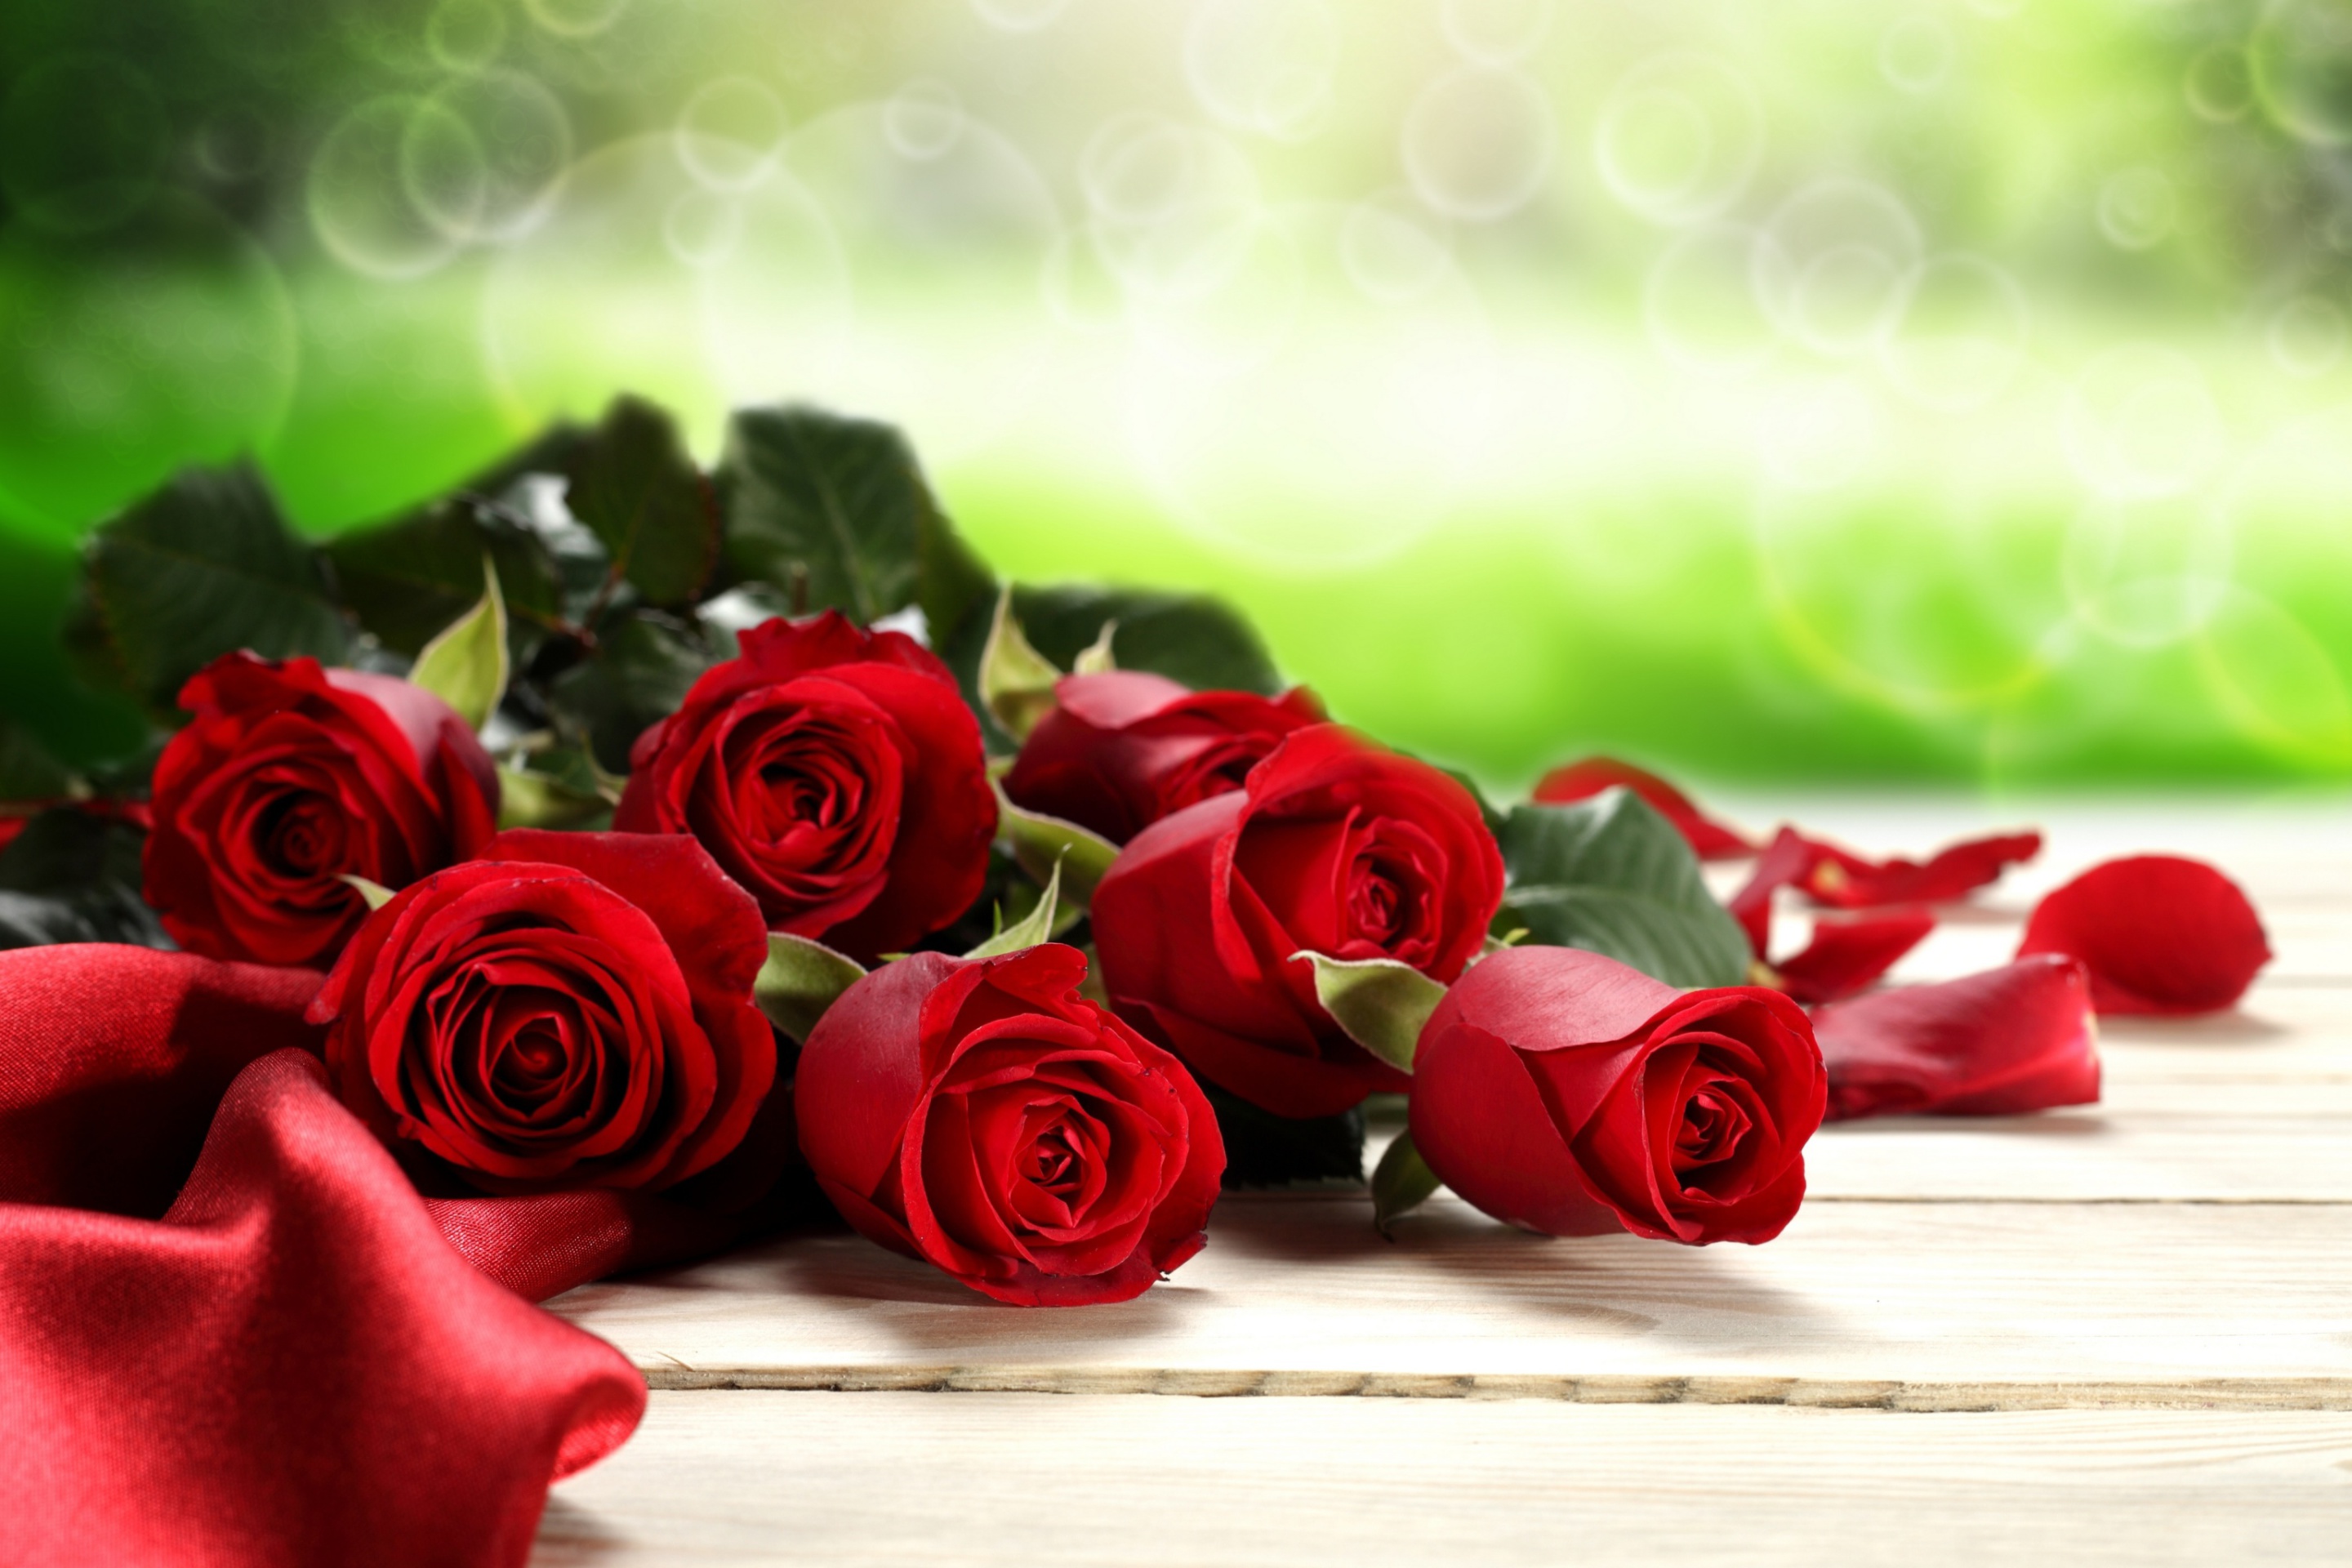 Red Roses for Valentines Day wallpaper 2880x1920